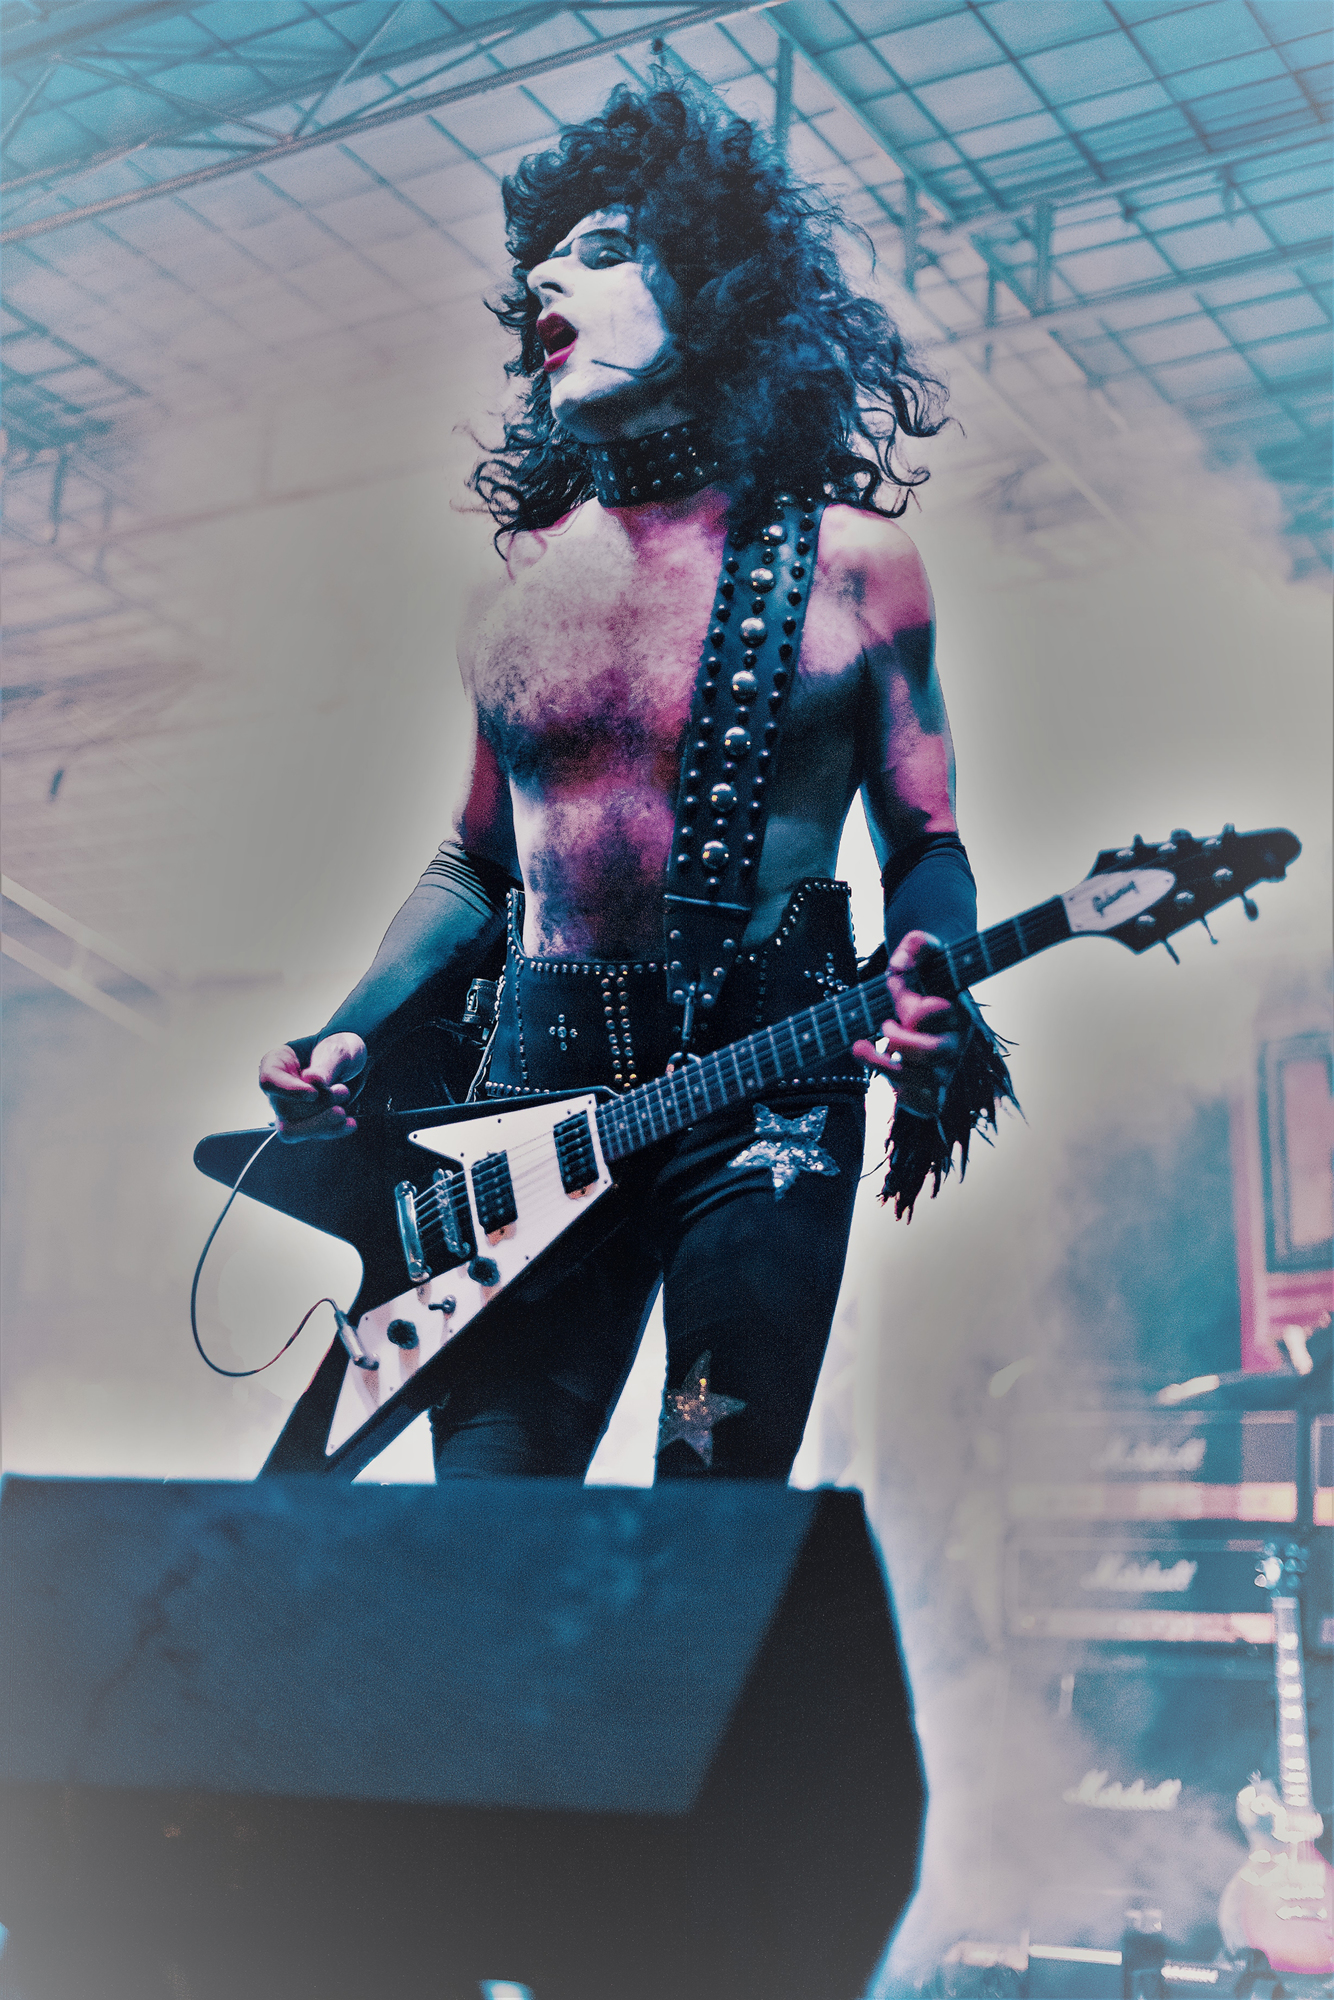 Florida rocker John Carlazzo takes the stage as guitarist/vocalist Paul Stanley for KISS ALIVE ... The Tribute.